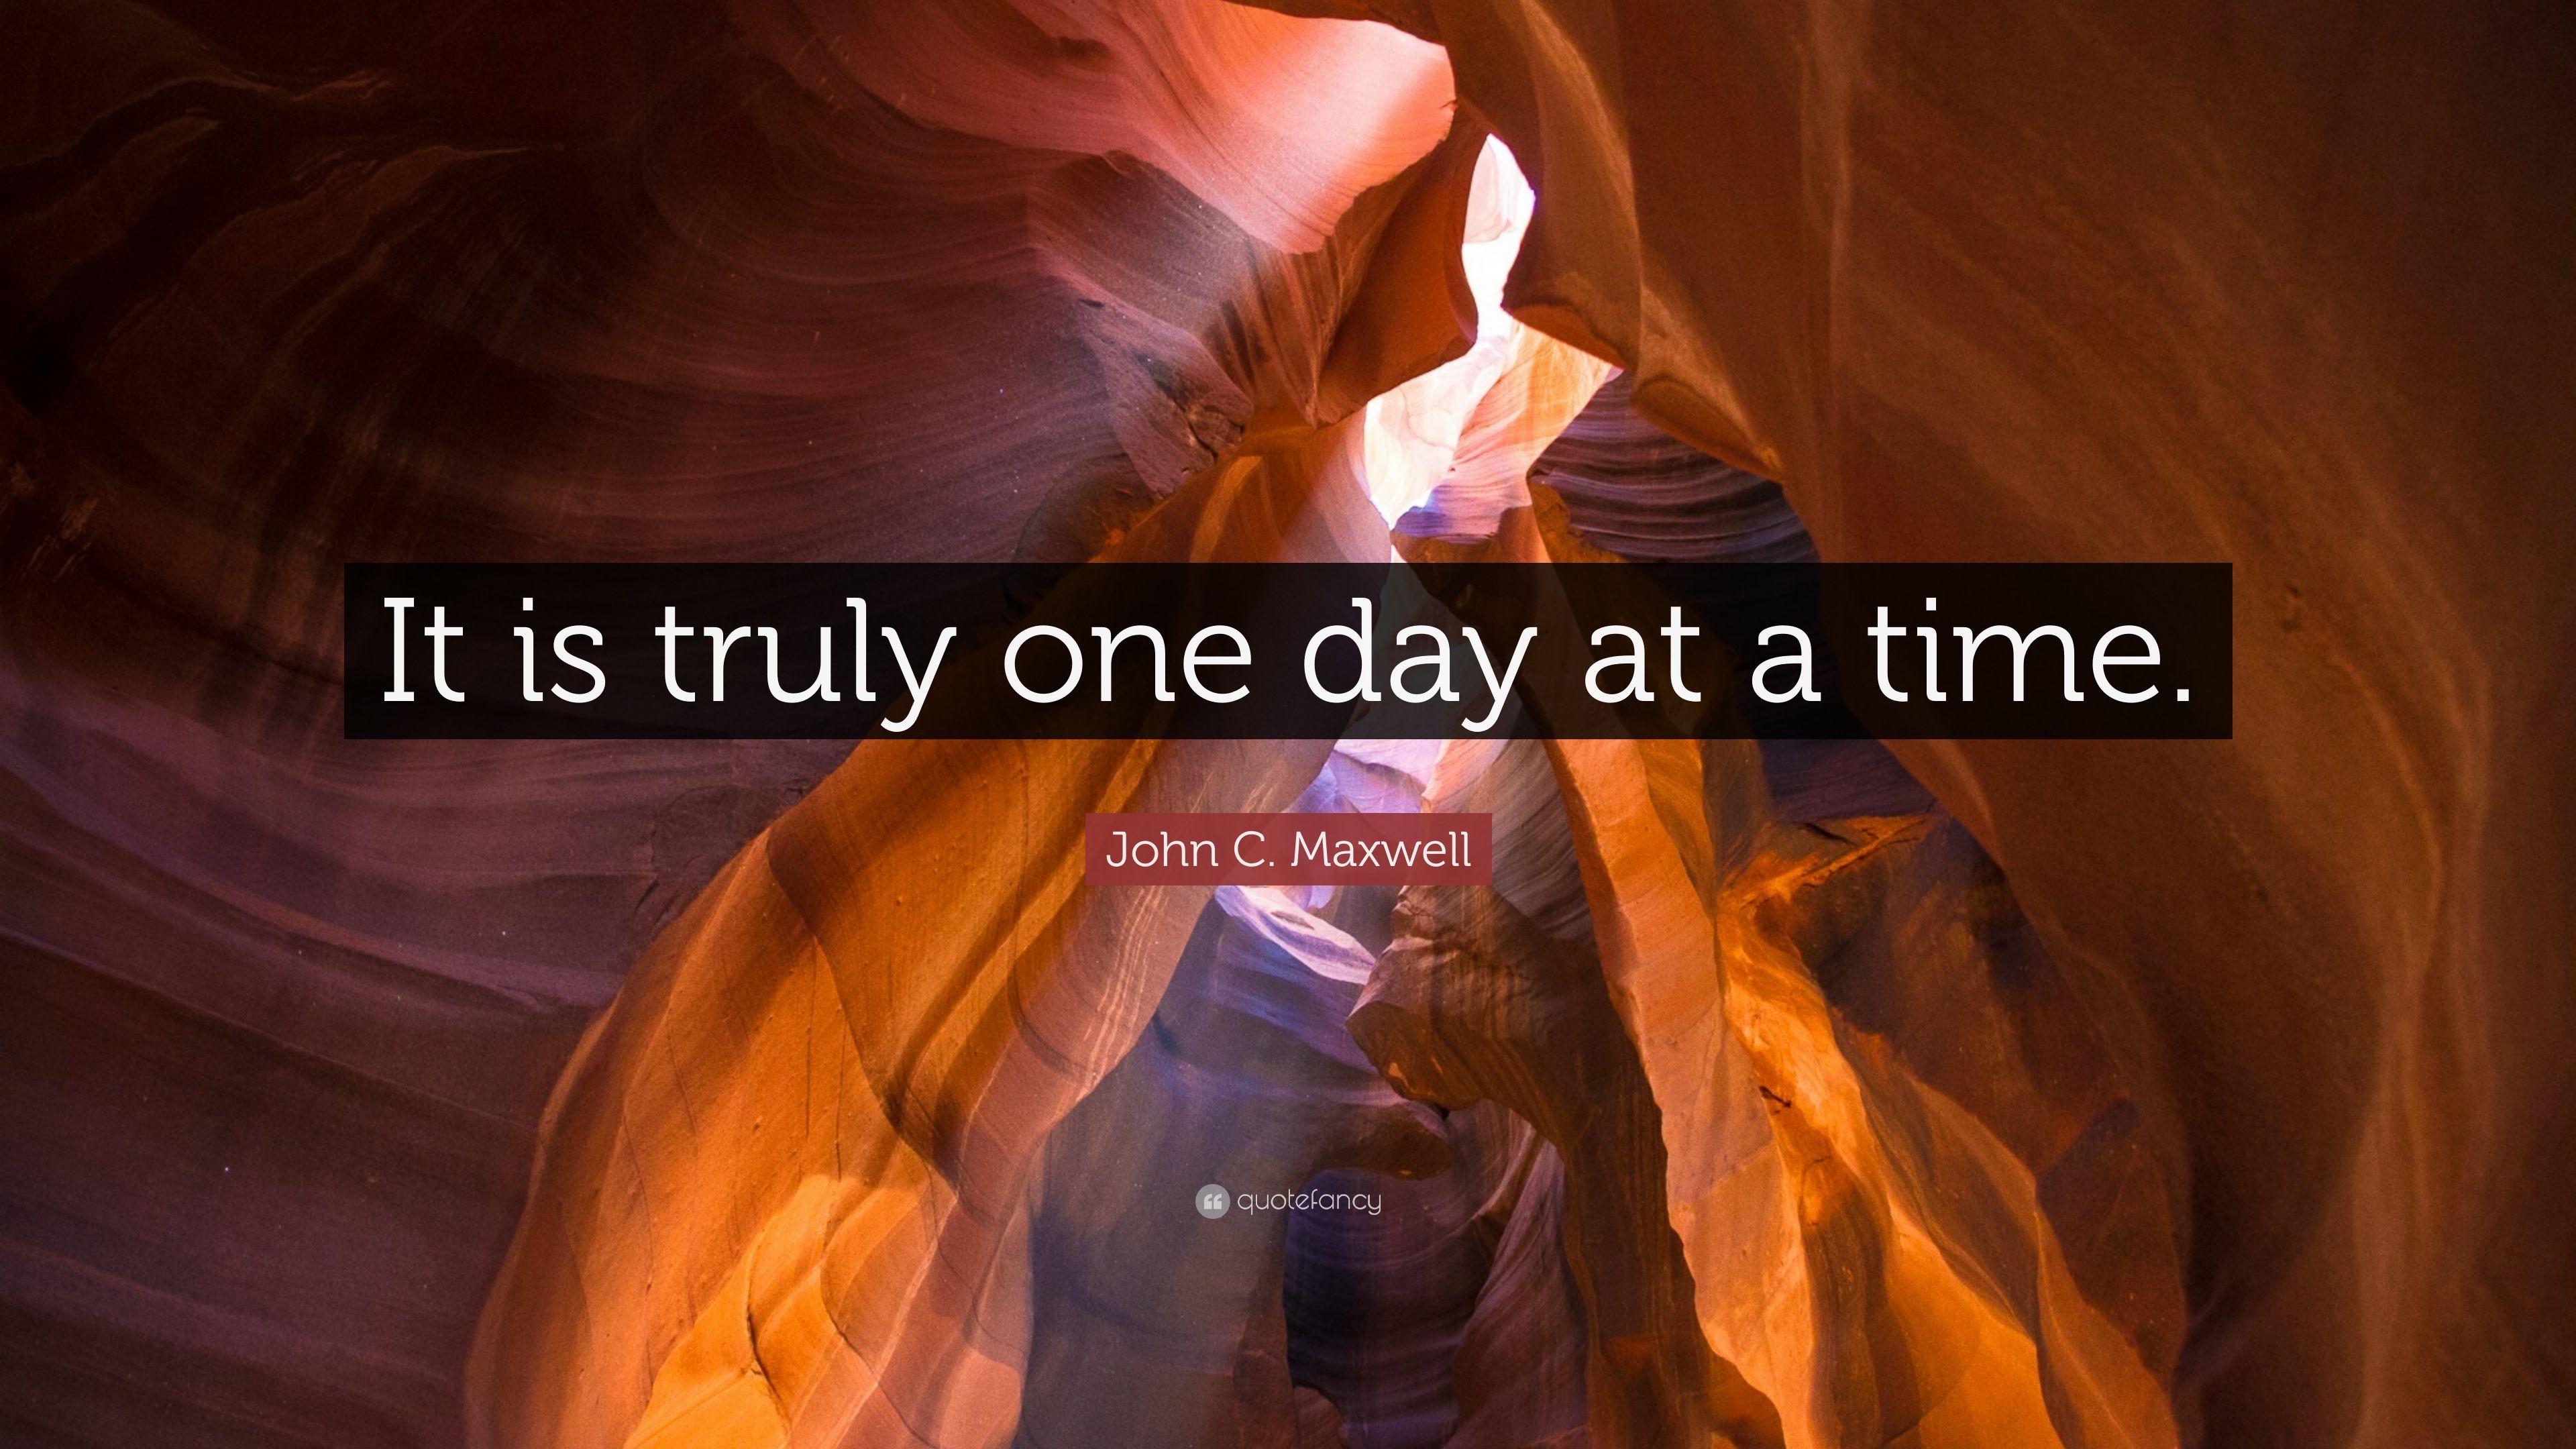 John C. Maxwell Quote: “It is truly one day at a time.” 5